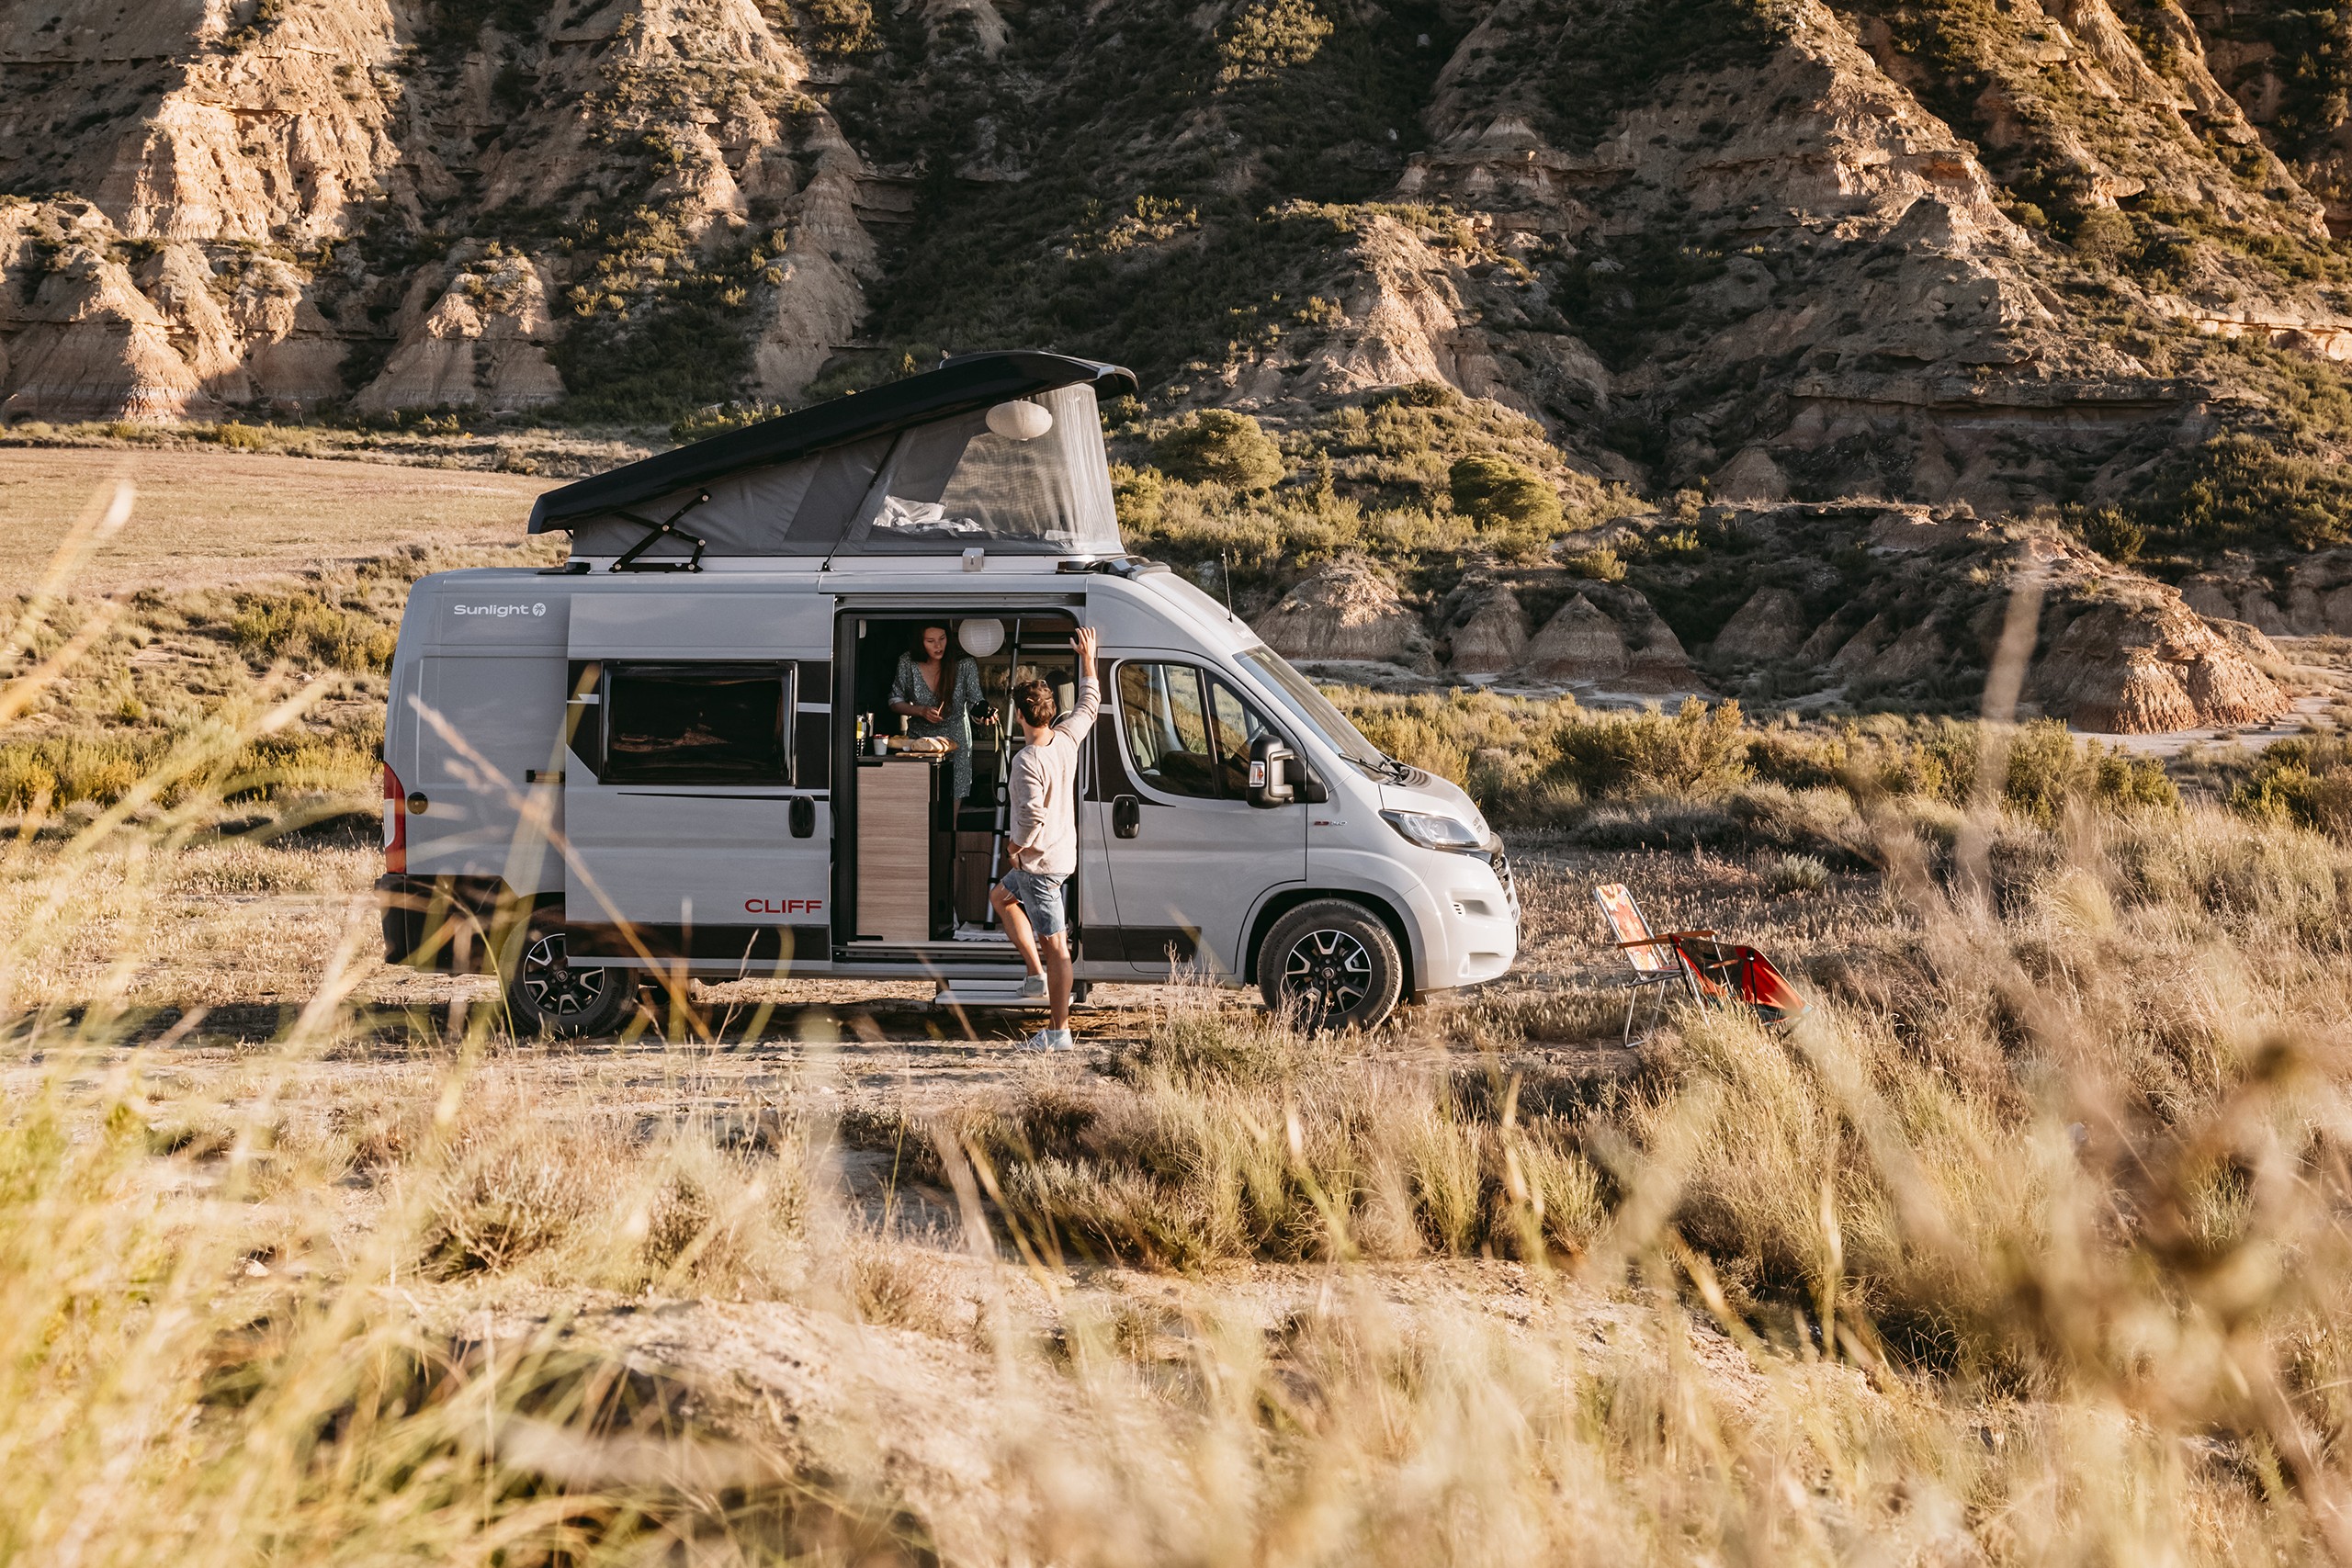 Want an Affordable and Capable Campervan? Sunlight's Cliff RT Is the ...